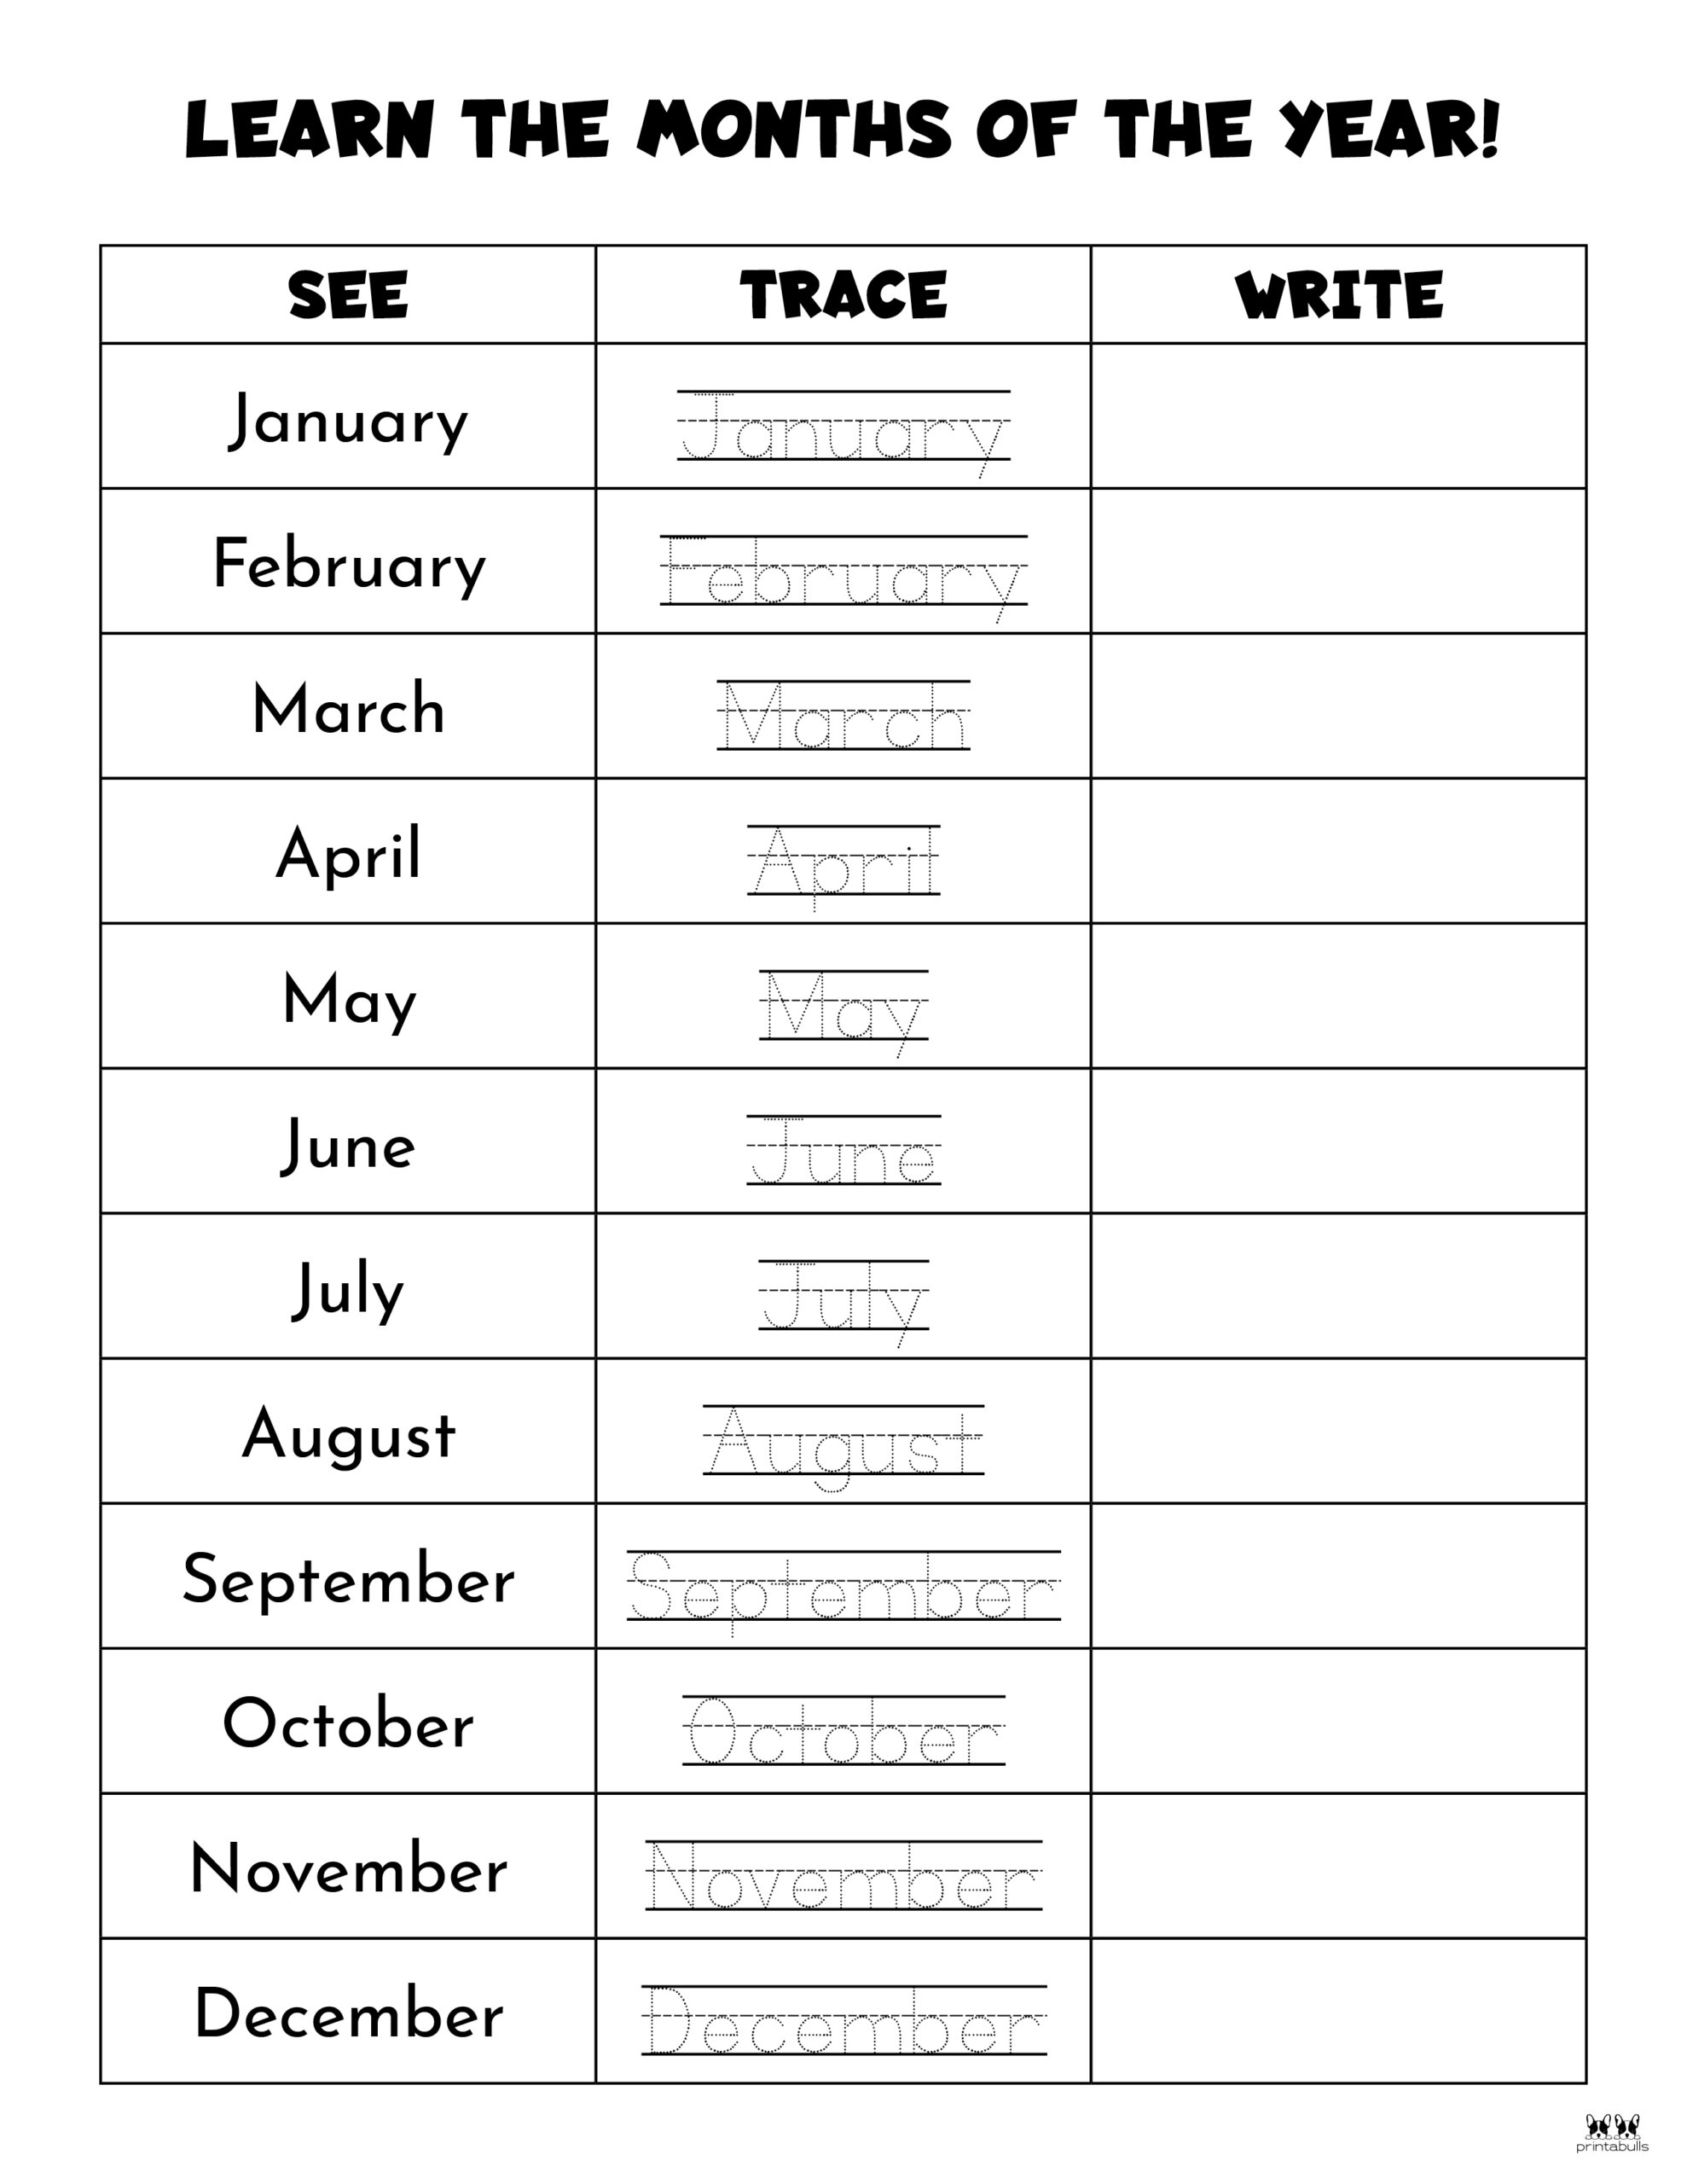 month-of-the-year-printable-free